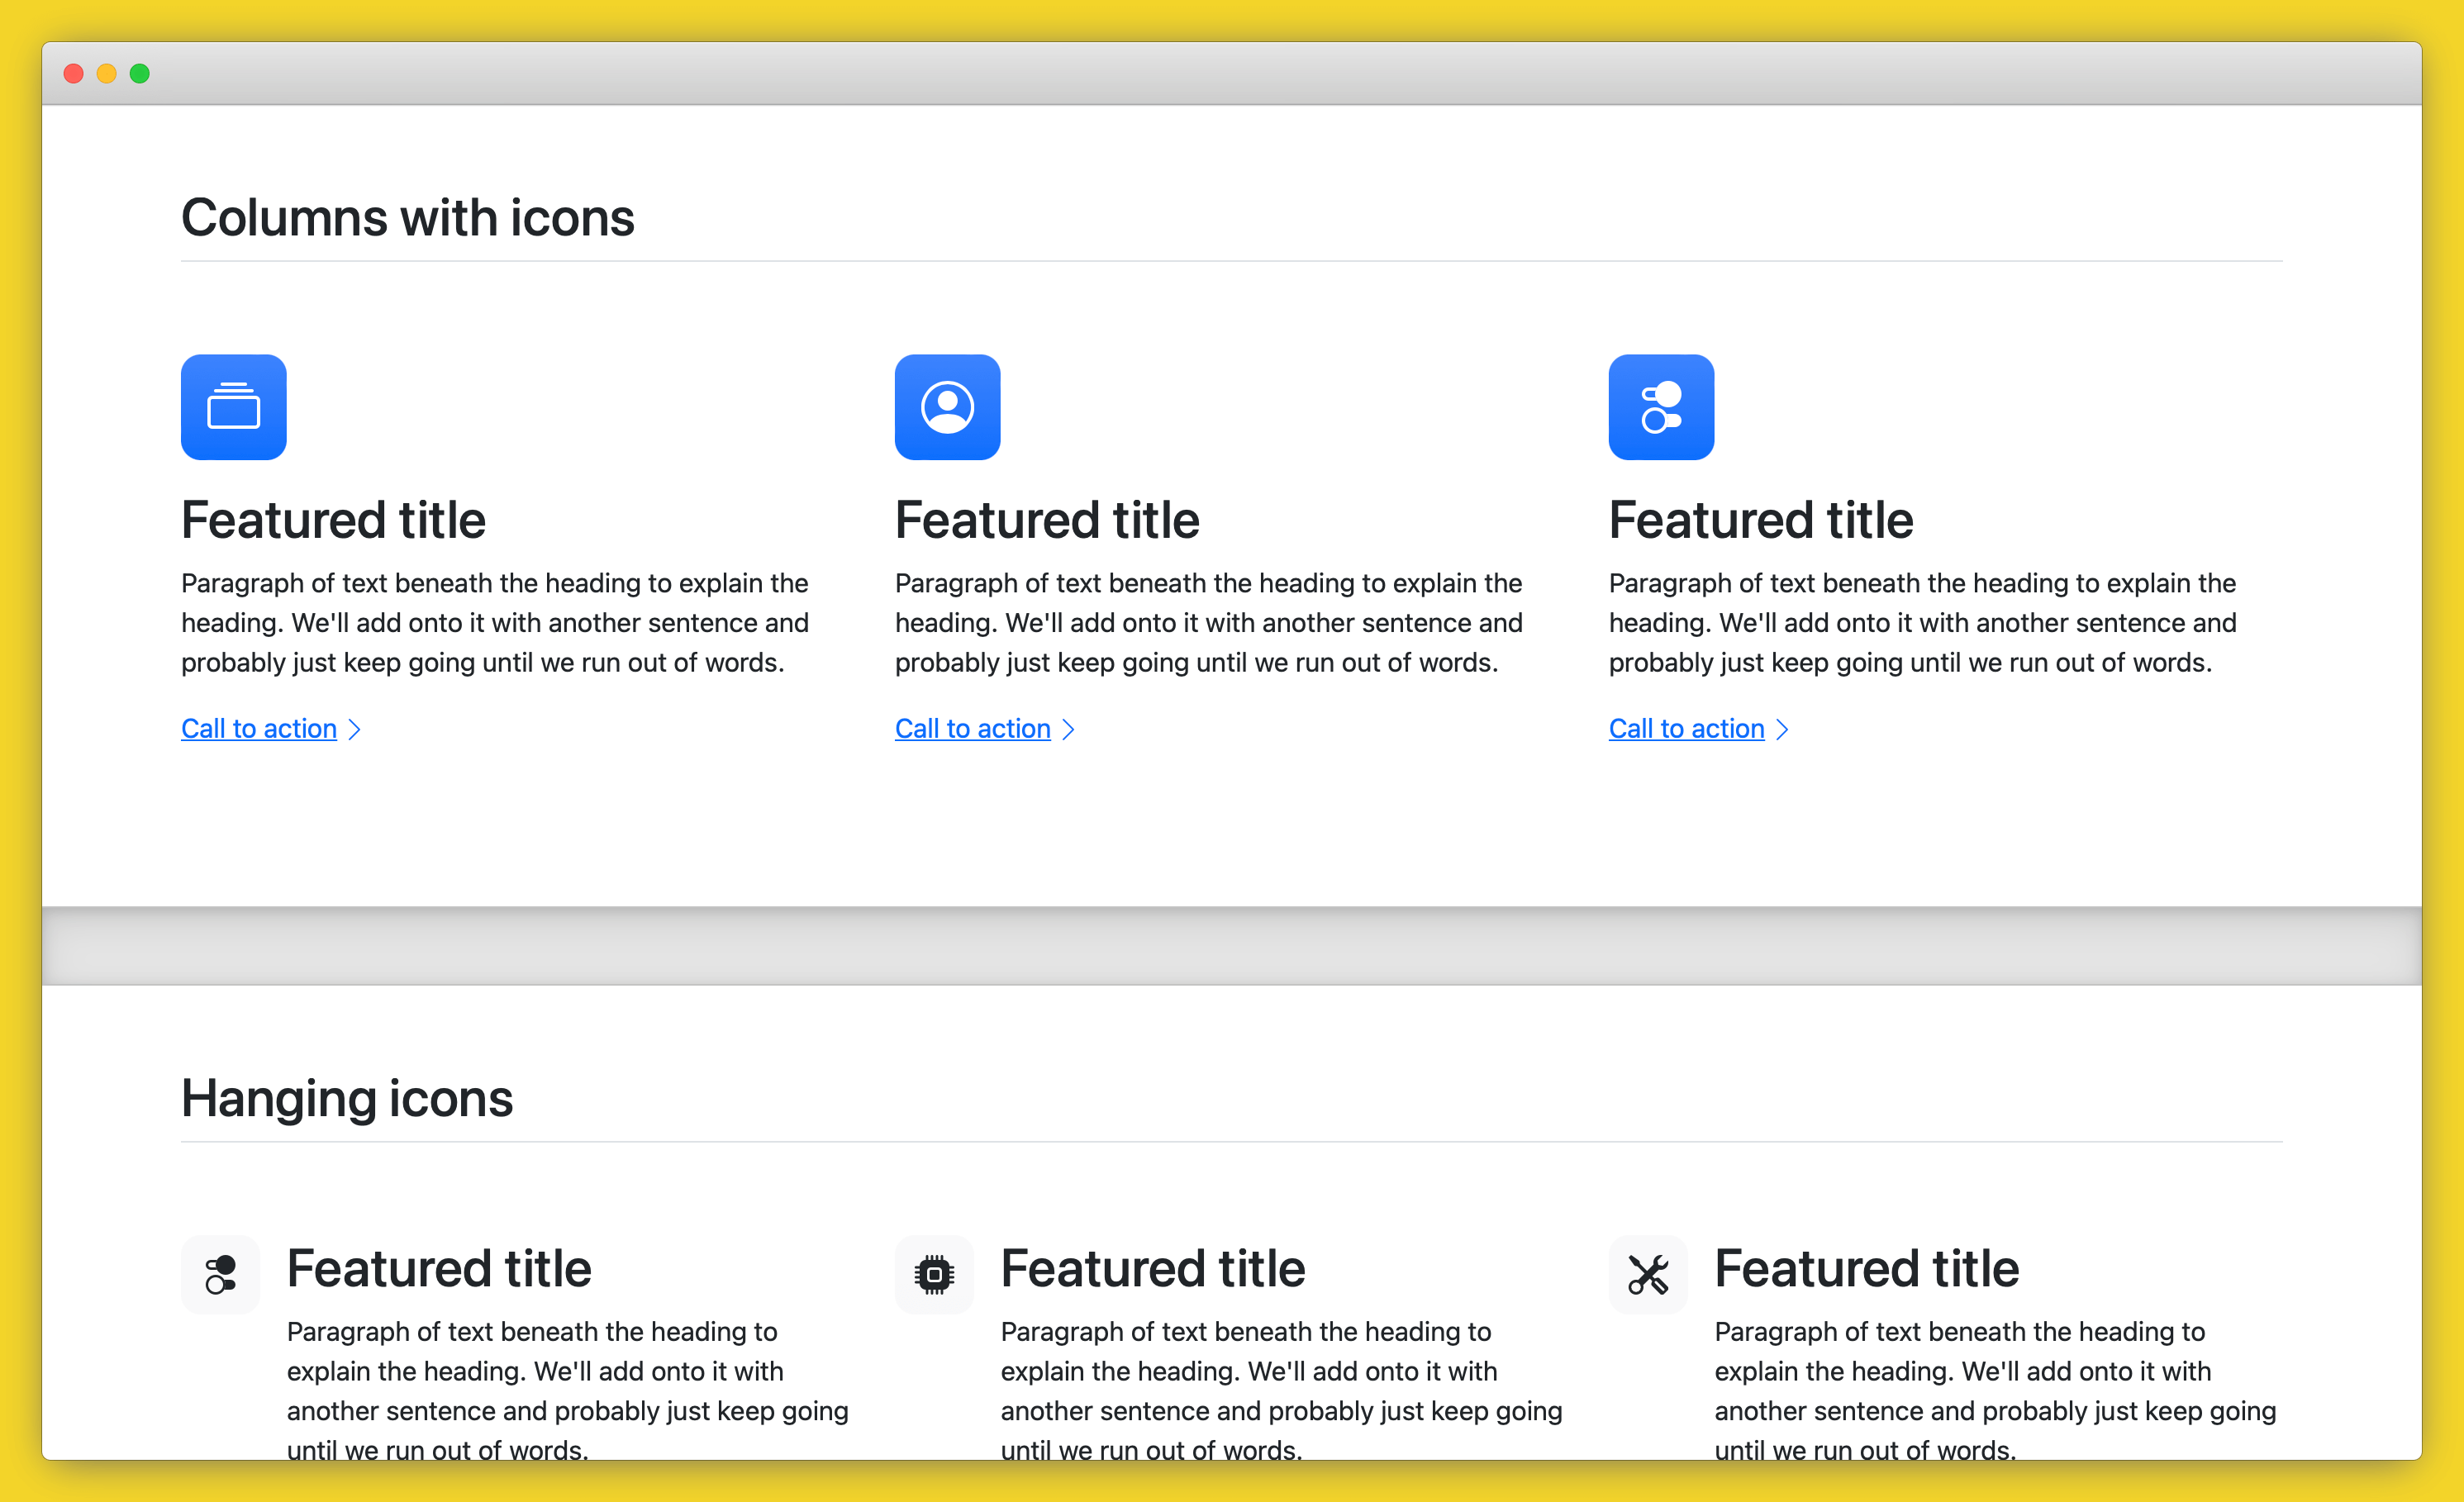 bootstrap site